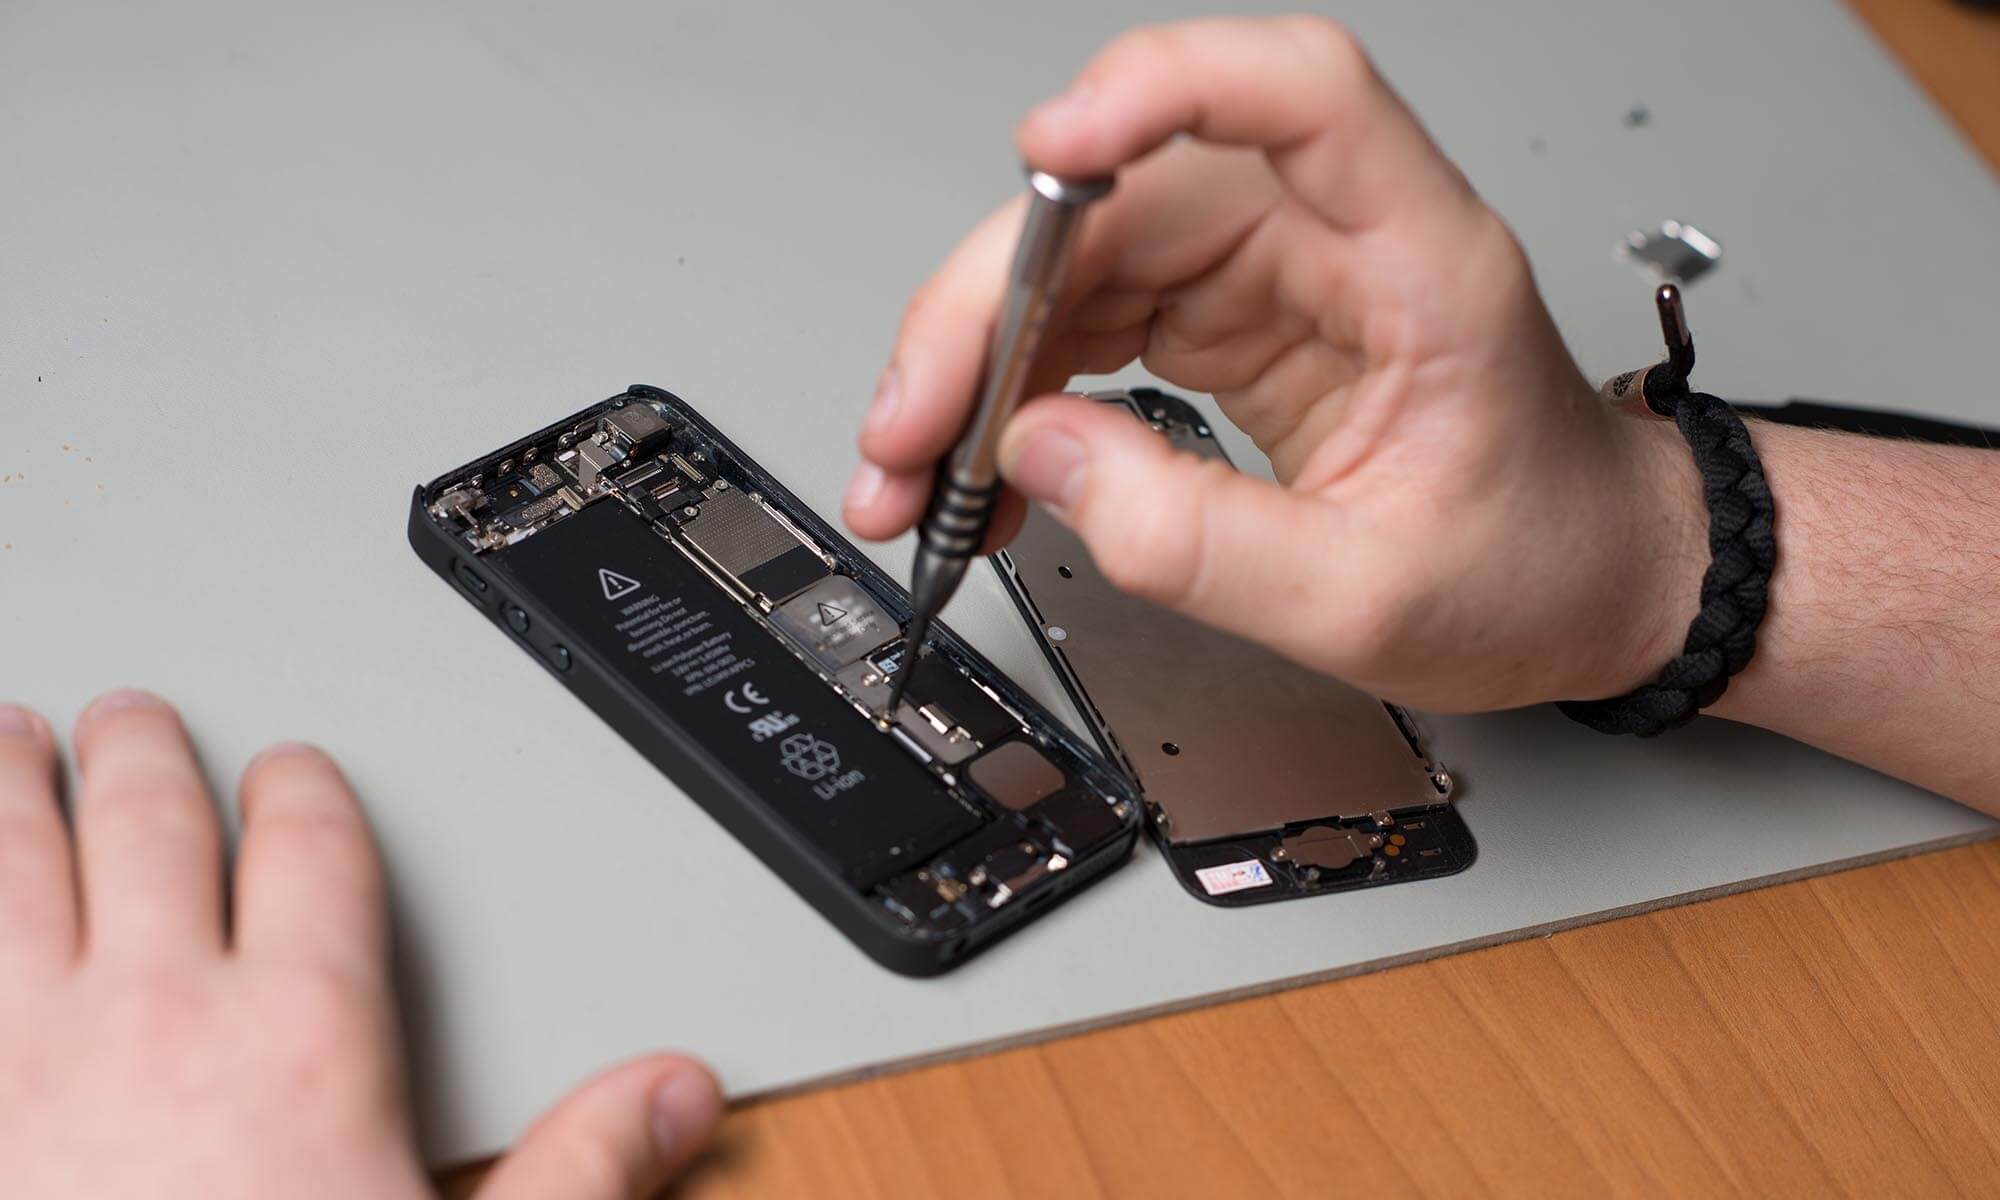 Apple tried to sue a small iPhone repair shop in Norway, the repair shop won